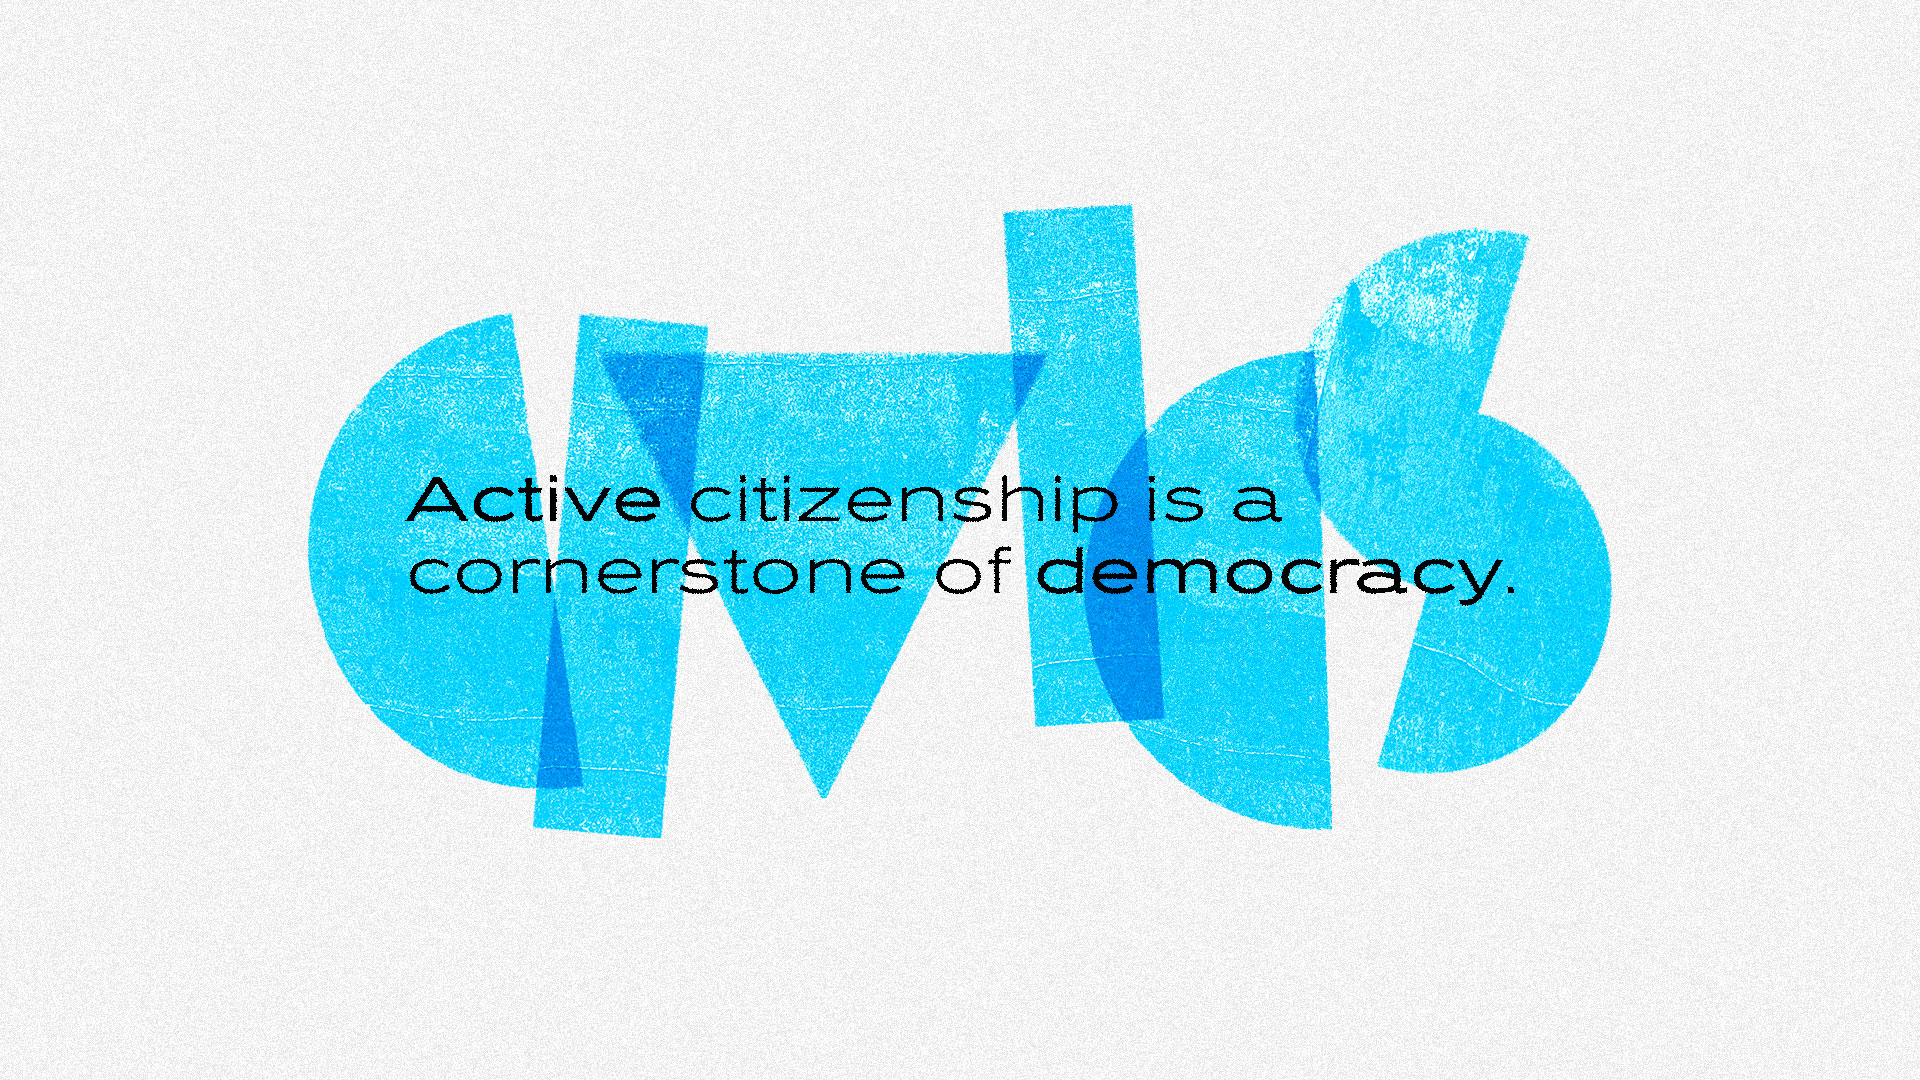 Active citizenship is a cornerstone of democracy